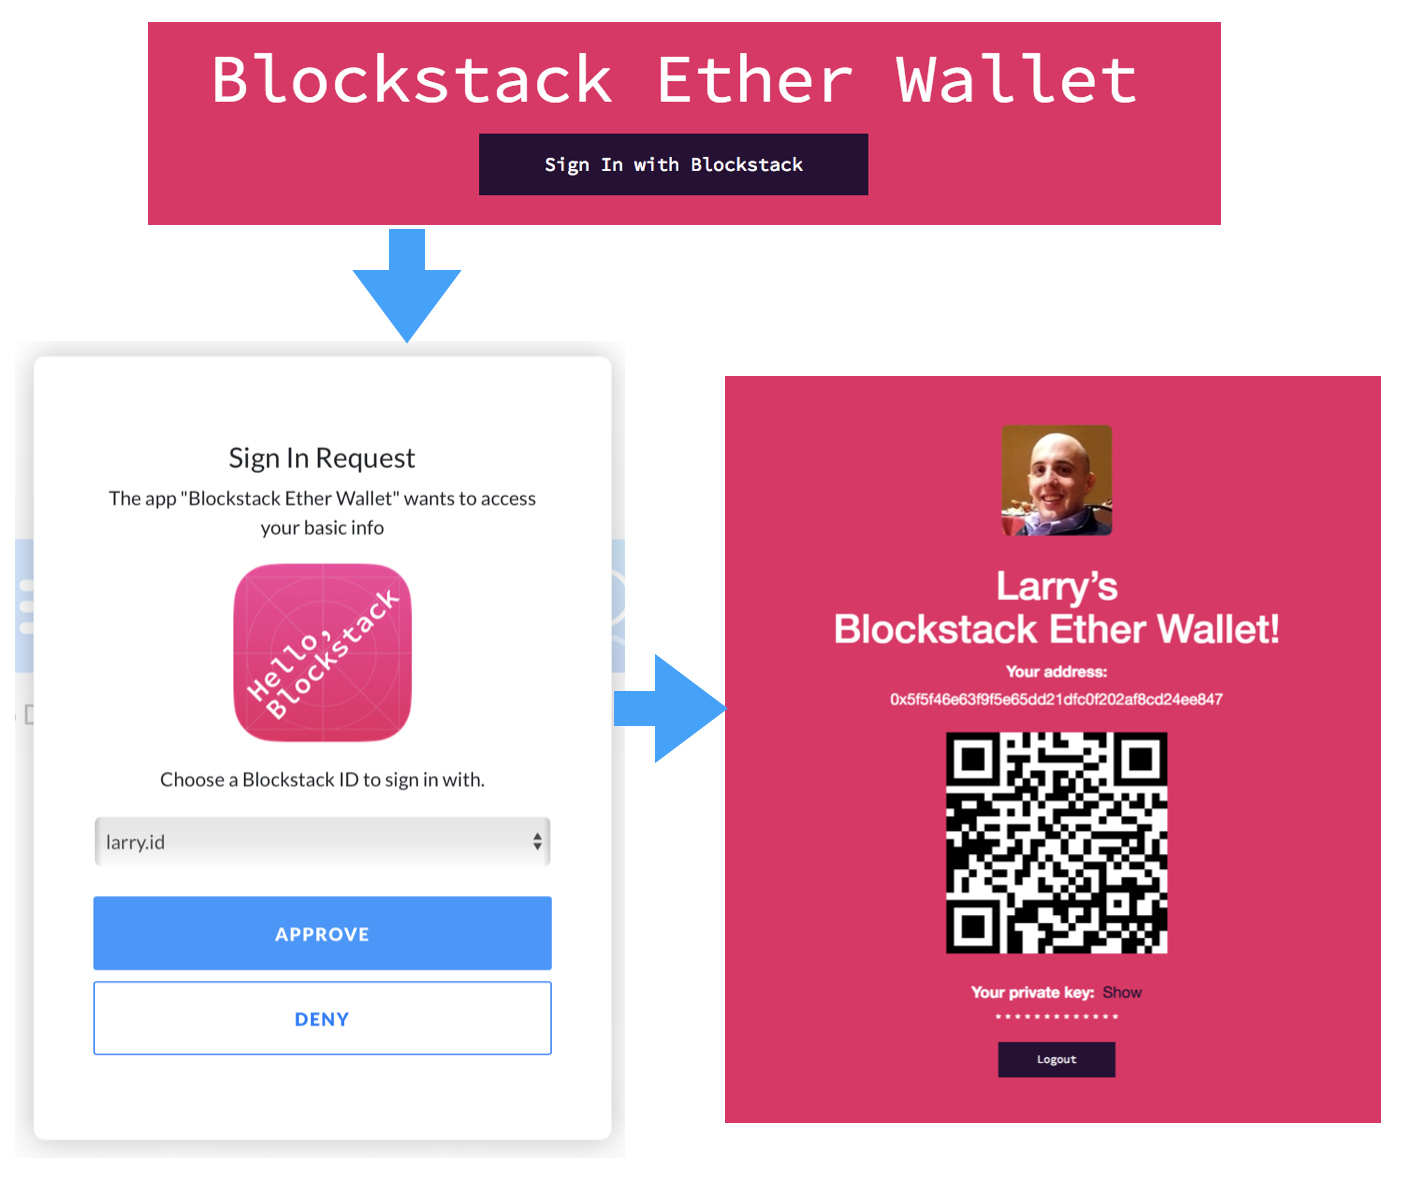 Blockstack Ether Wallet sign in process